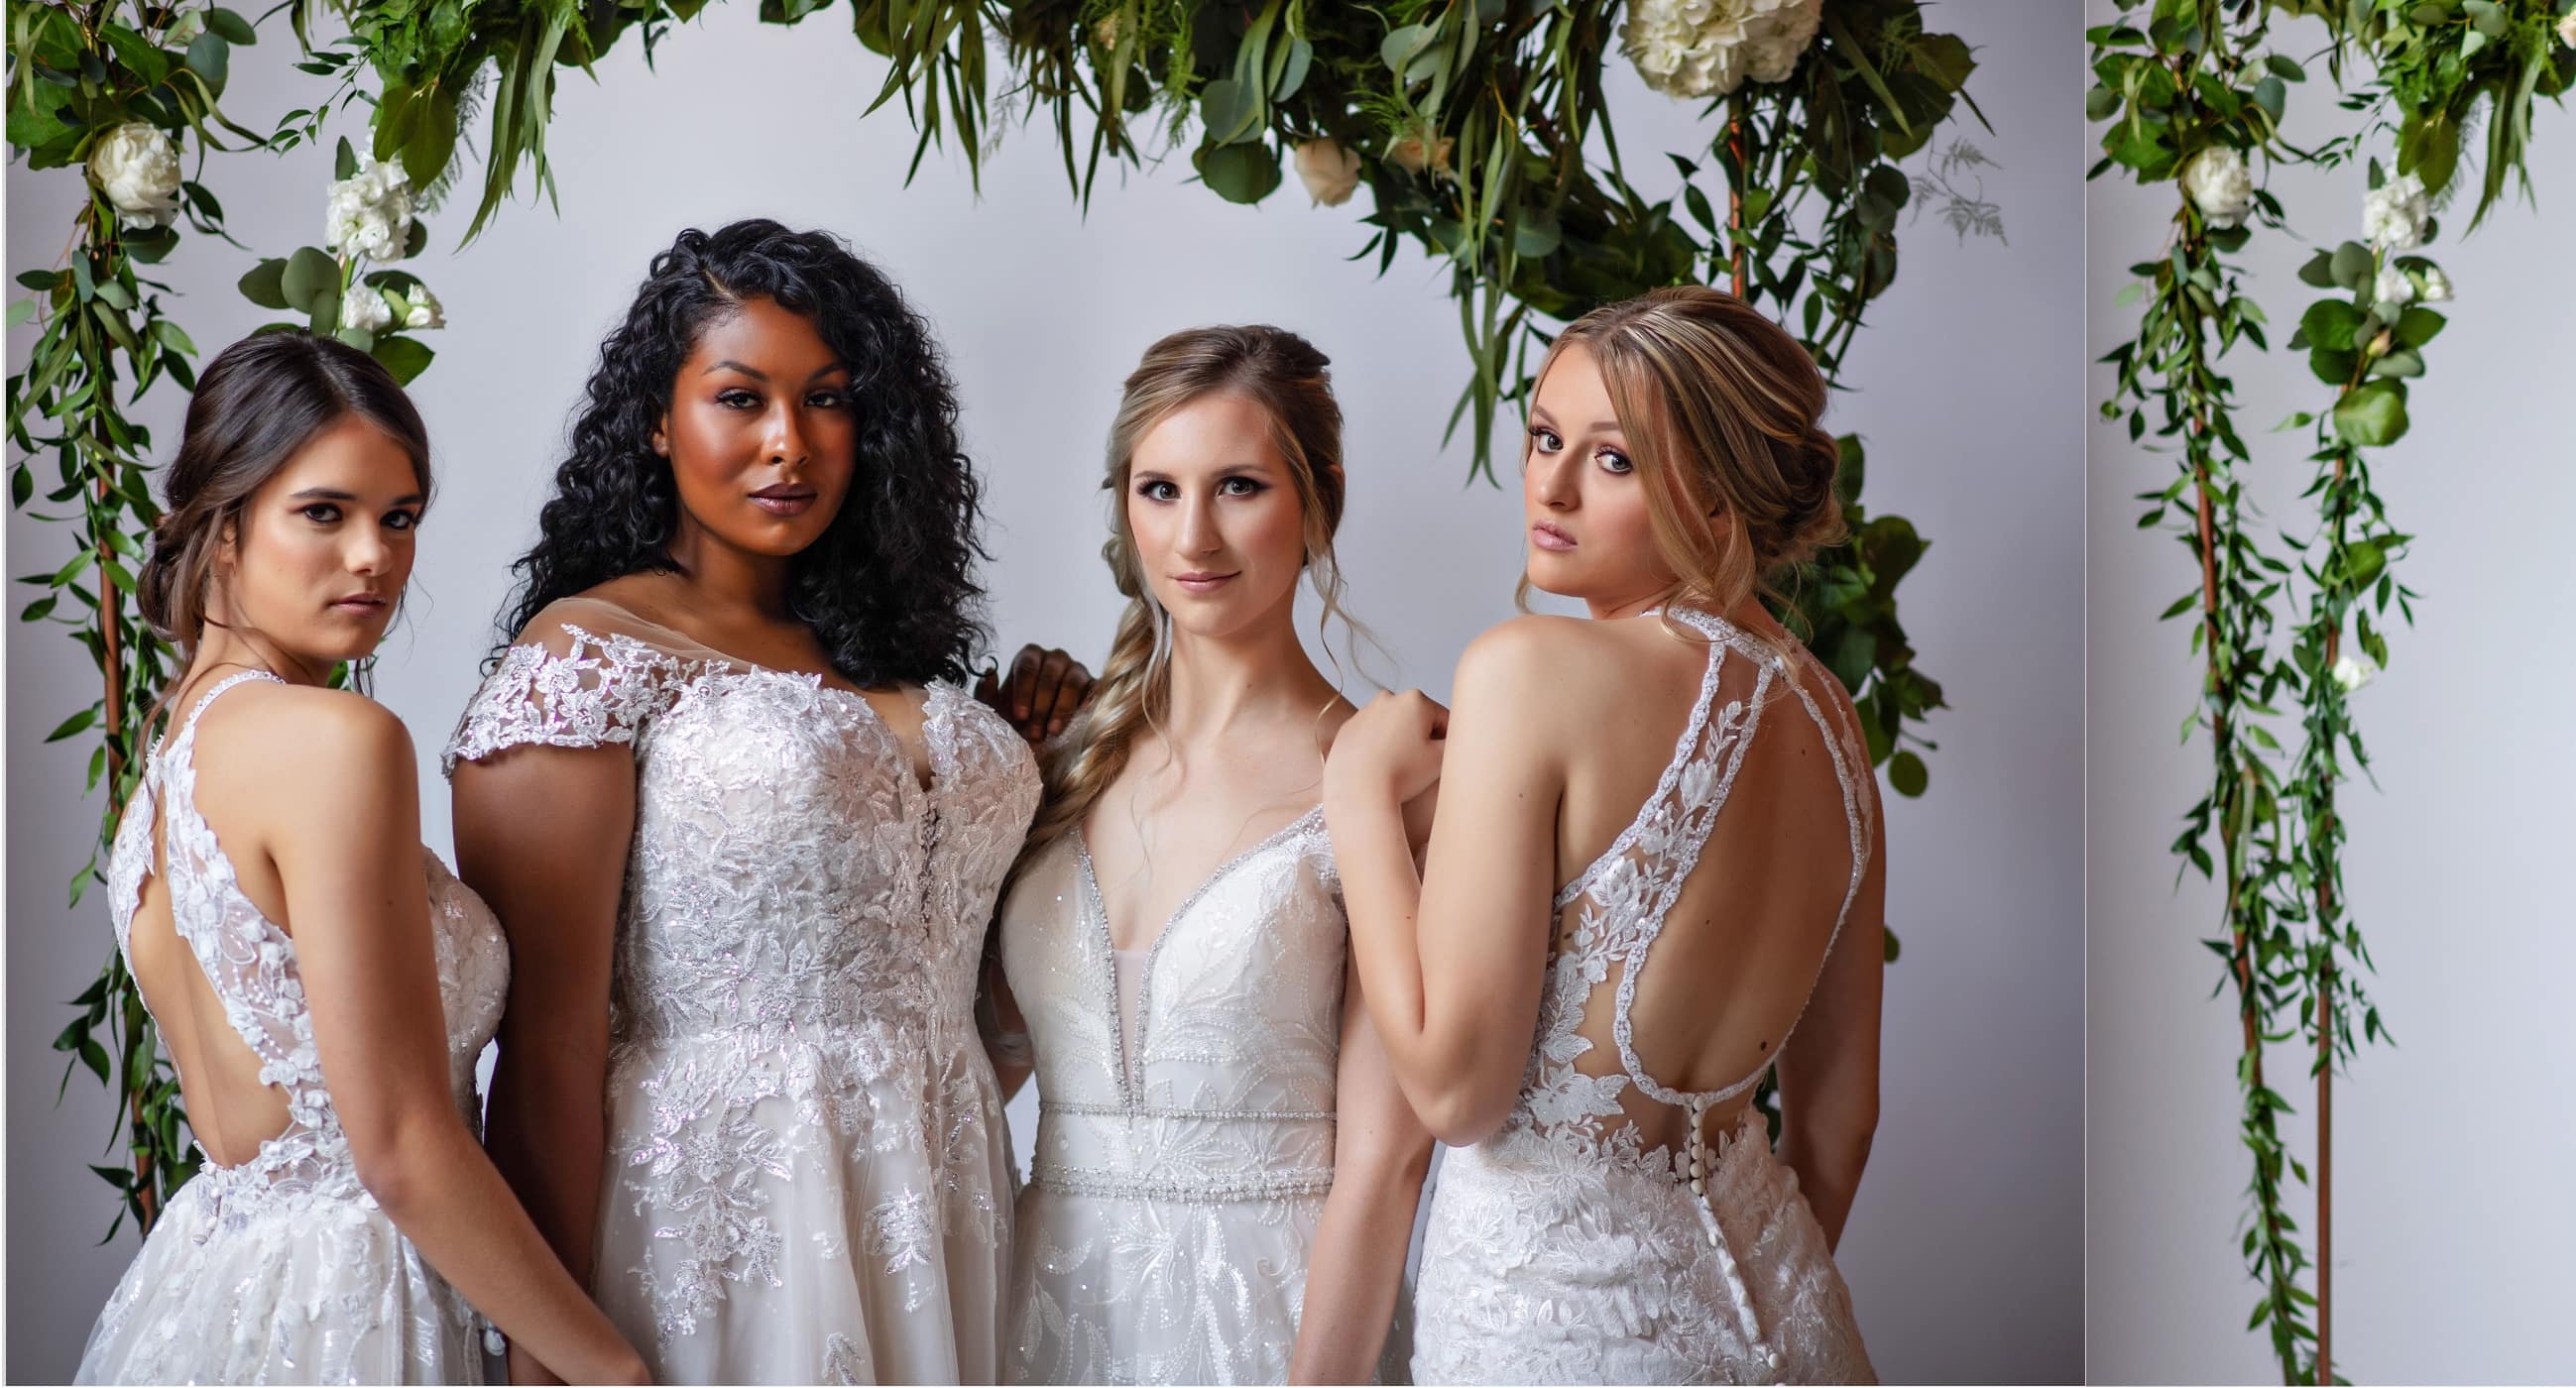 brides in gorgeous, off the rack wedding dresses from here and now bridal in virginia beach